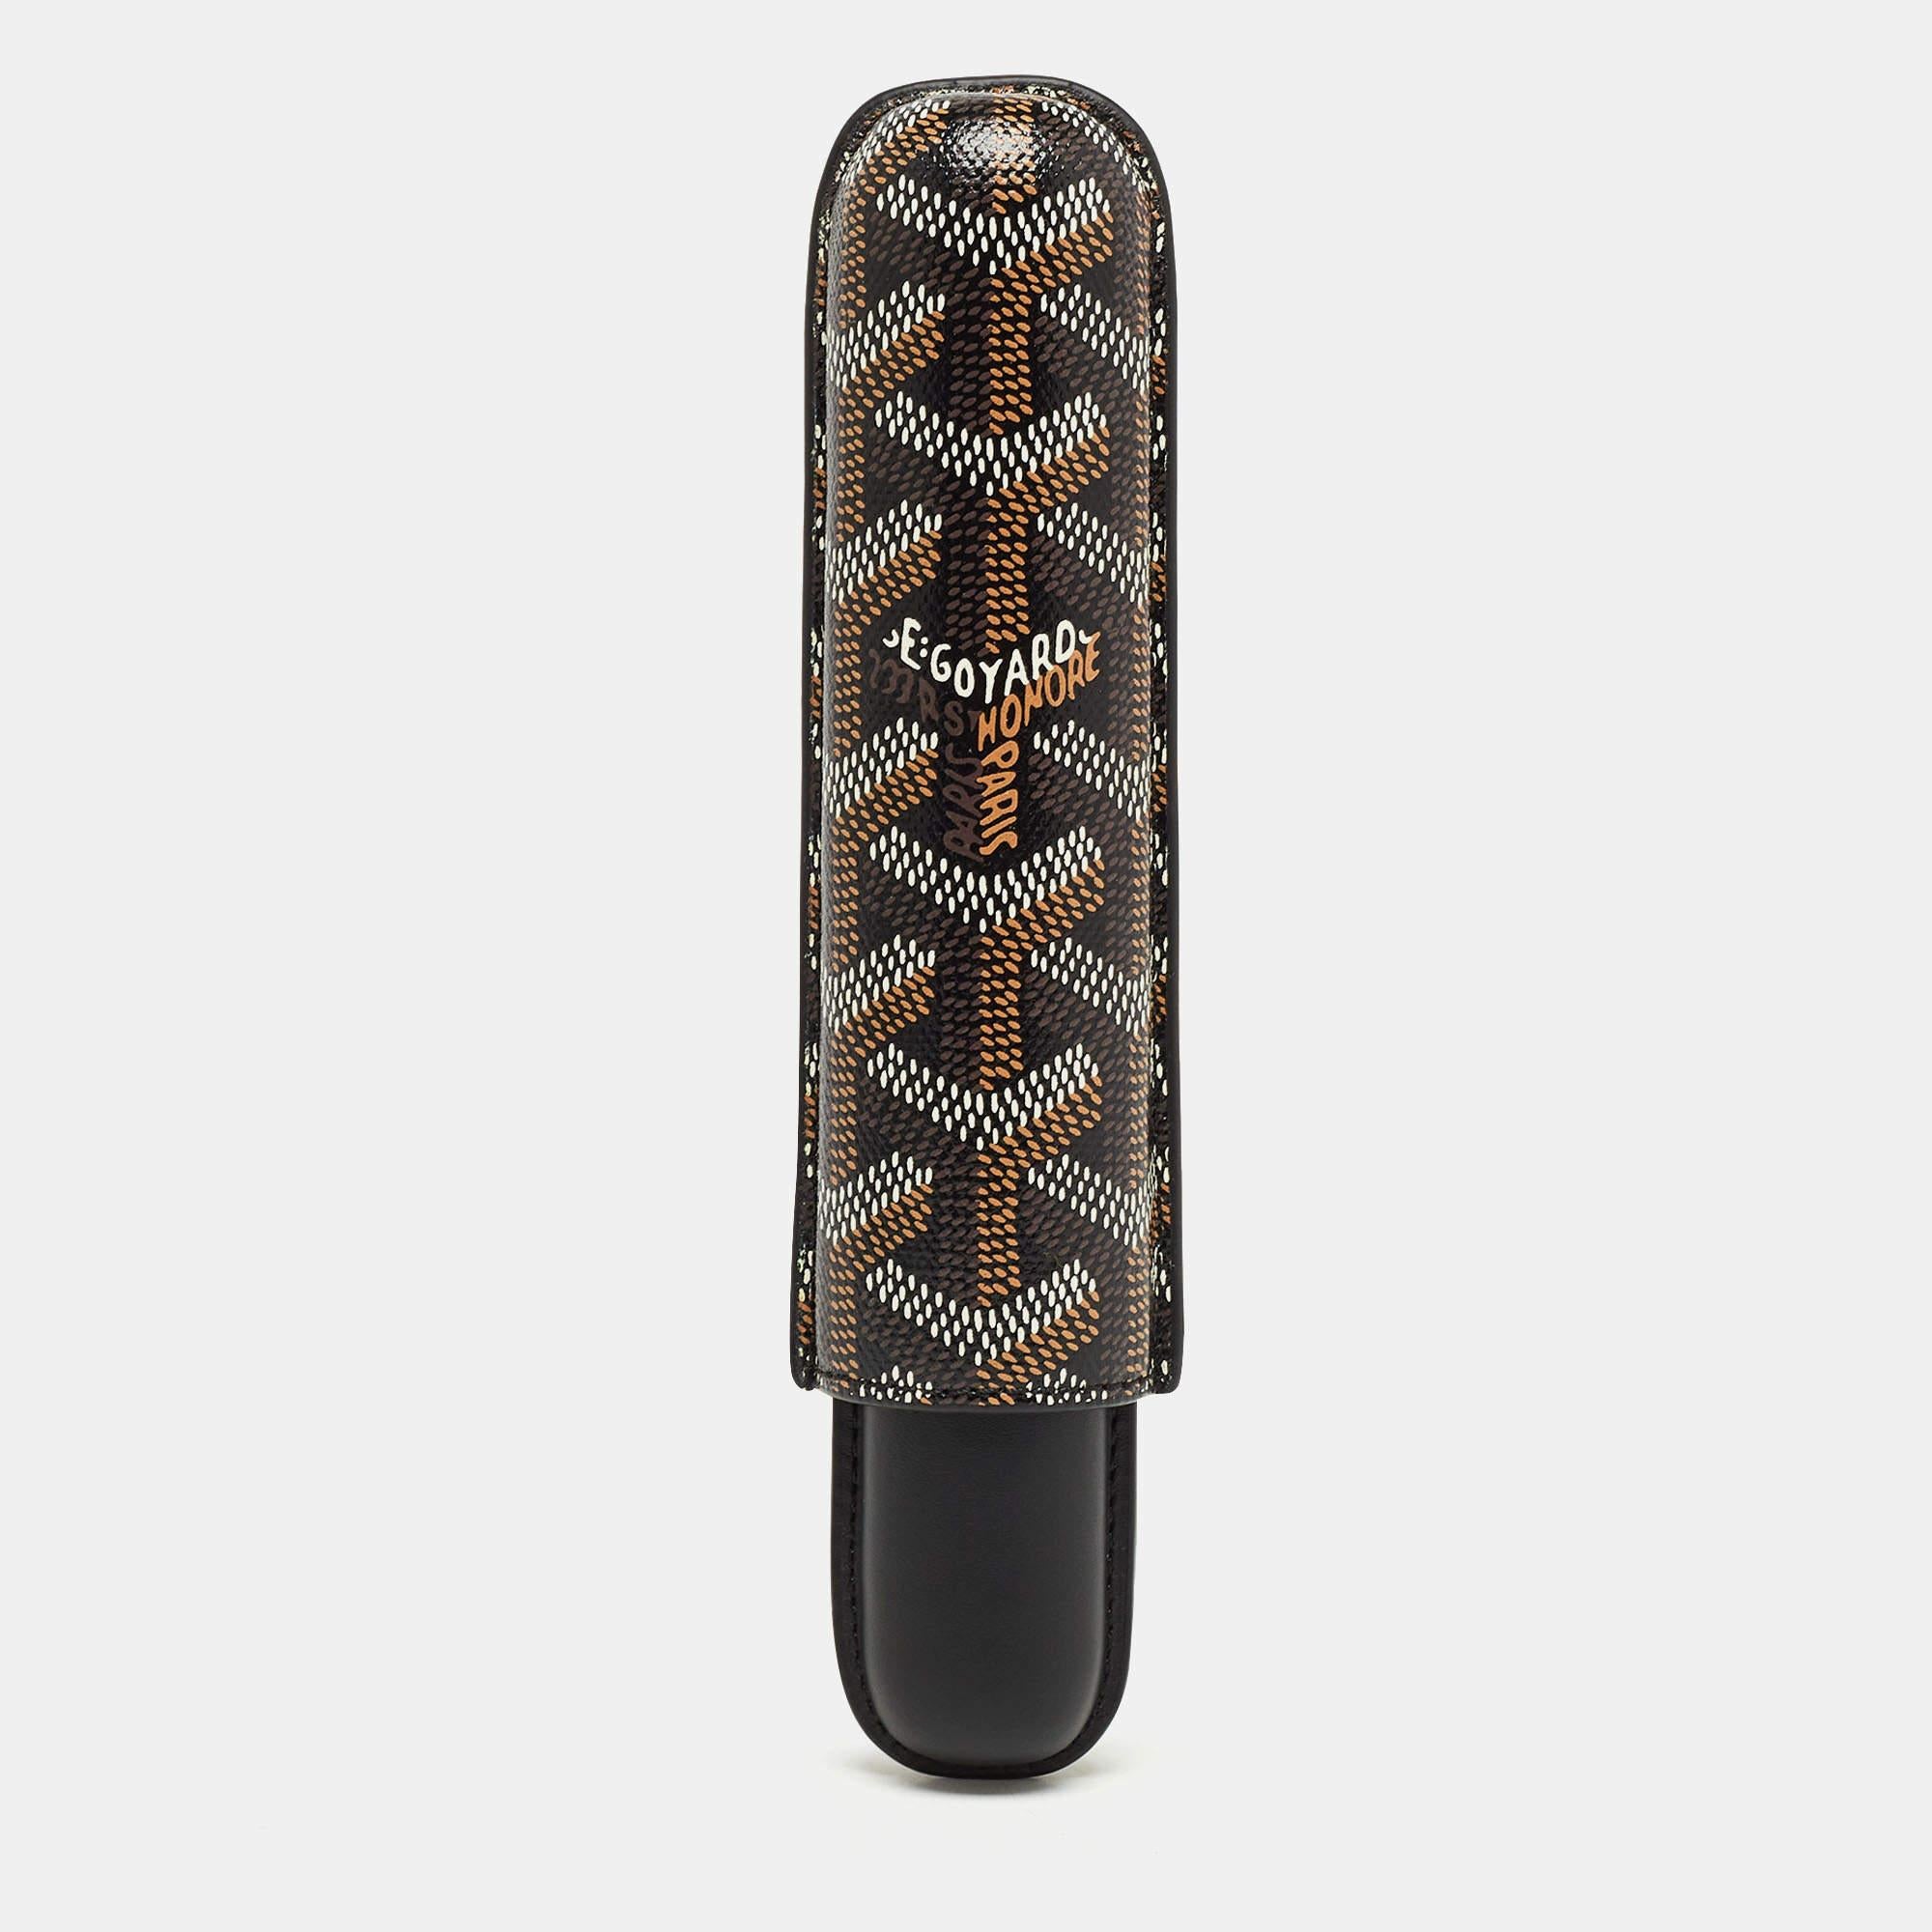 This Churchill cigar case from the house of Goyard is crafted from signature Goyardine-coated canvas as well as leather and designed to hold a single cigar.

